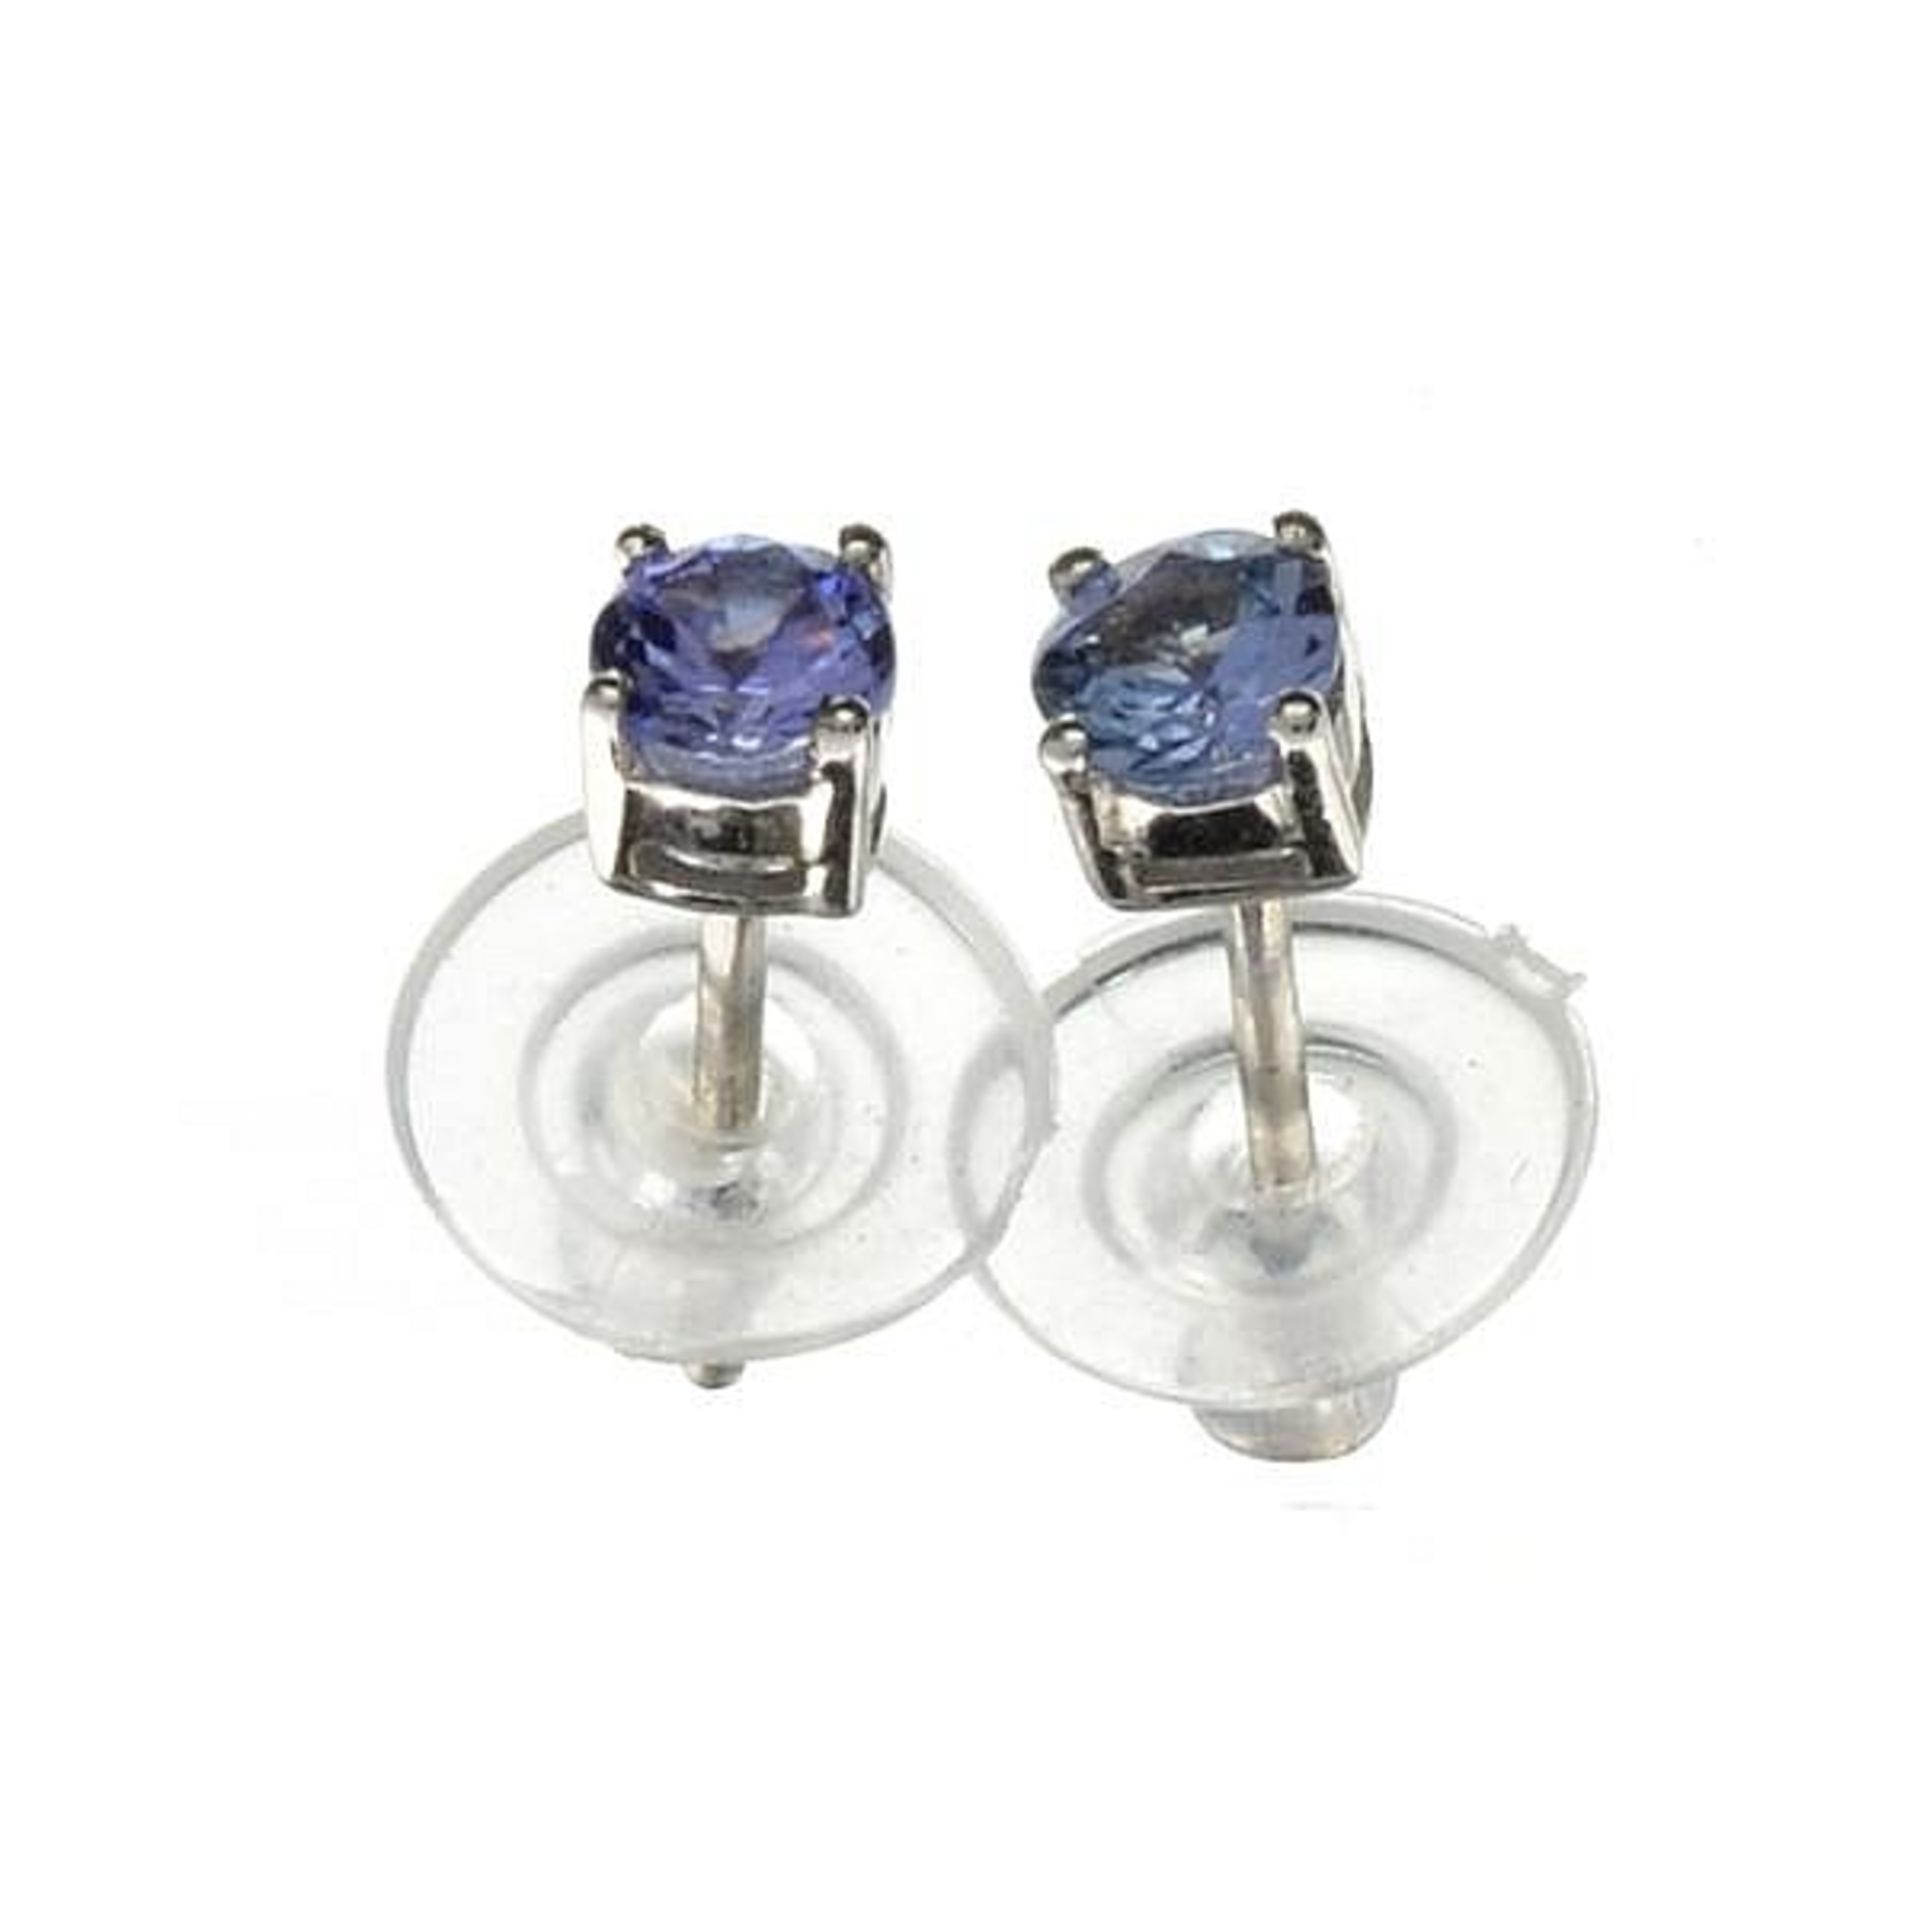 2 x Round Cut Tanzanite gemstones = 0.51 carat And Platinum Over Silver Earrings. Appraised by